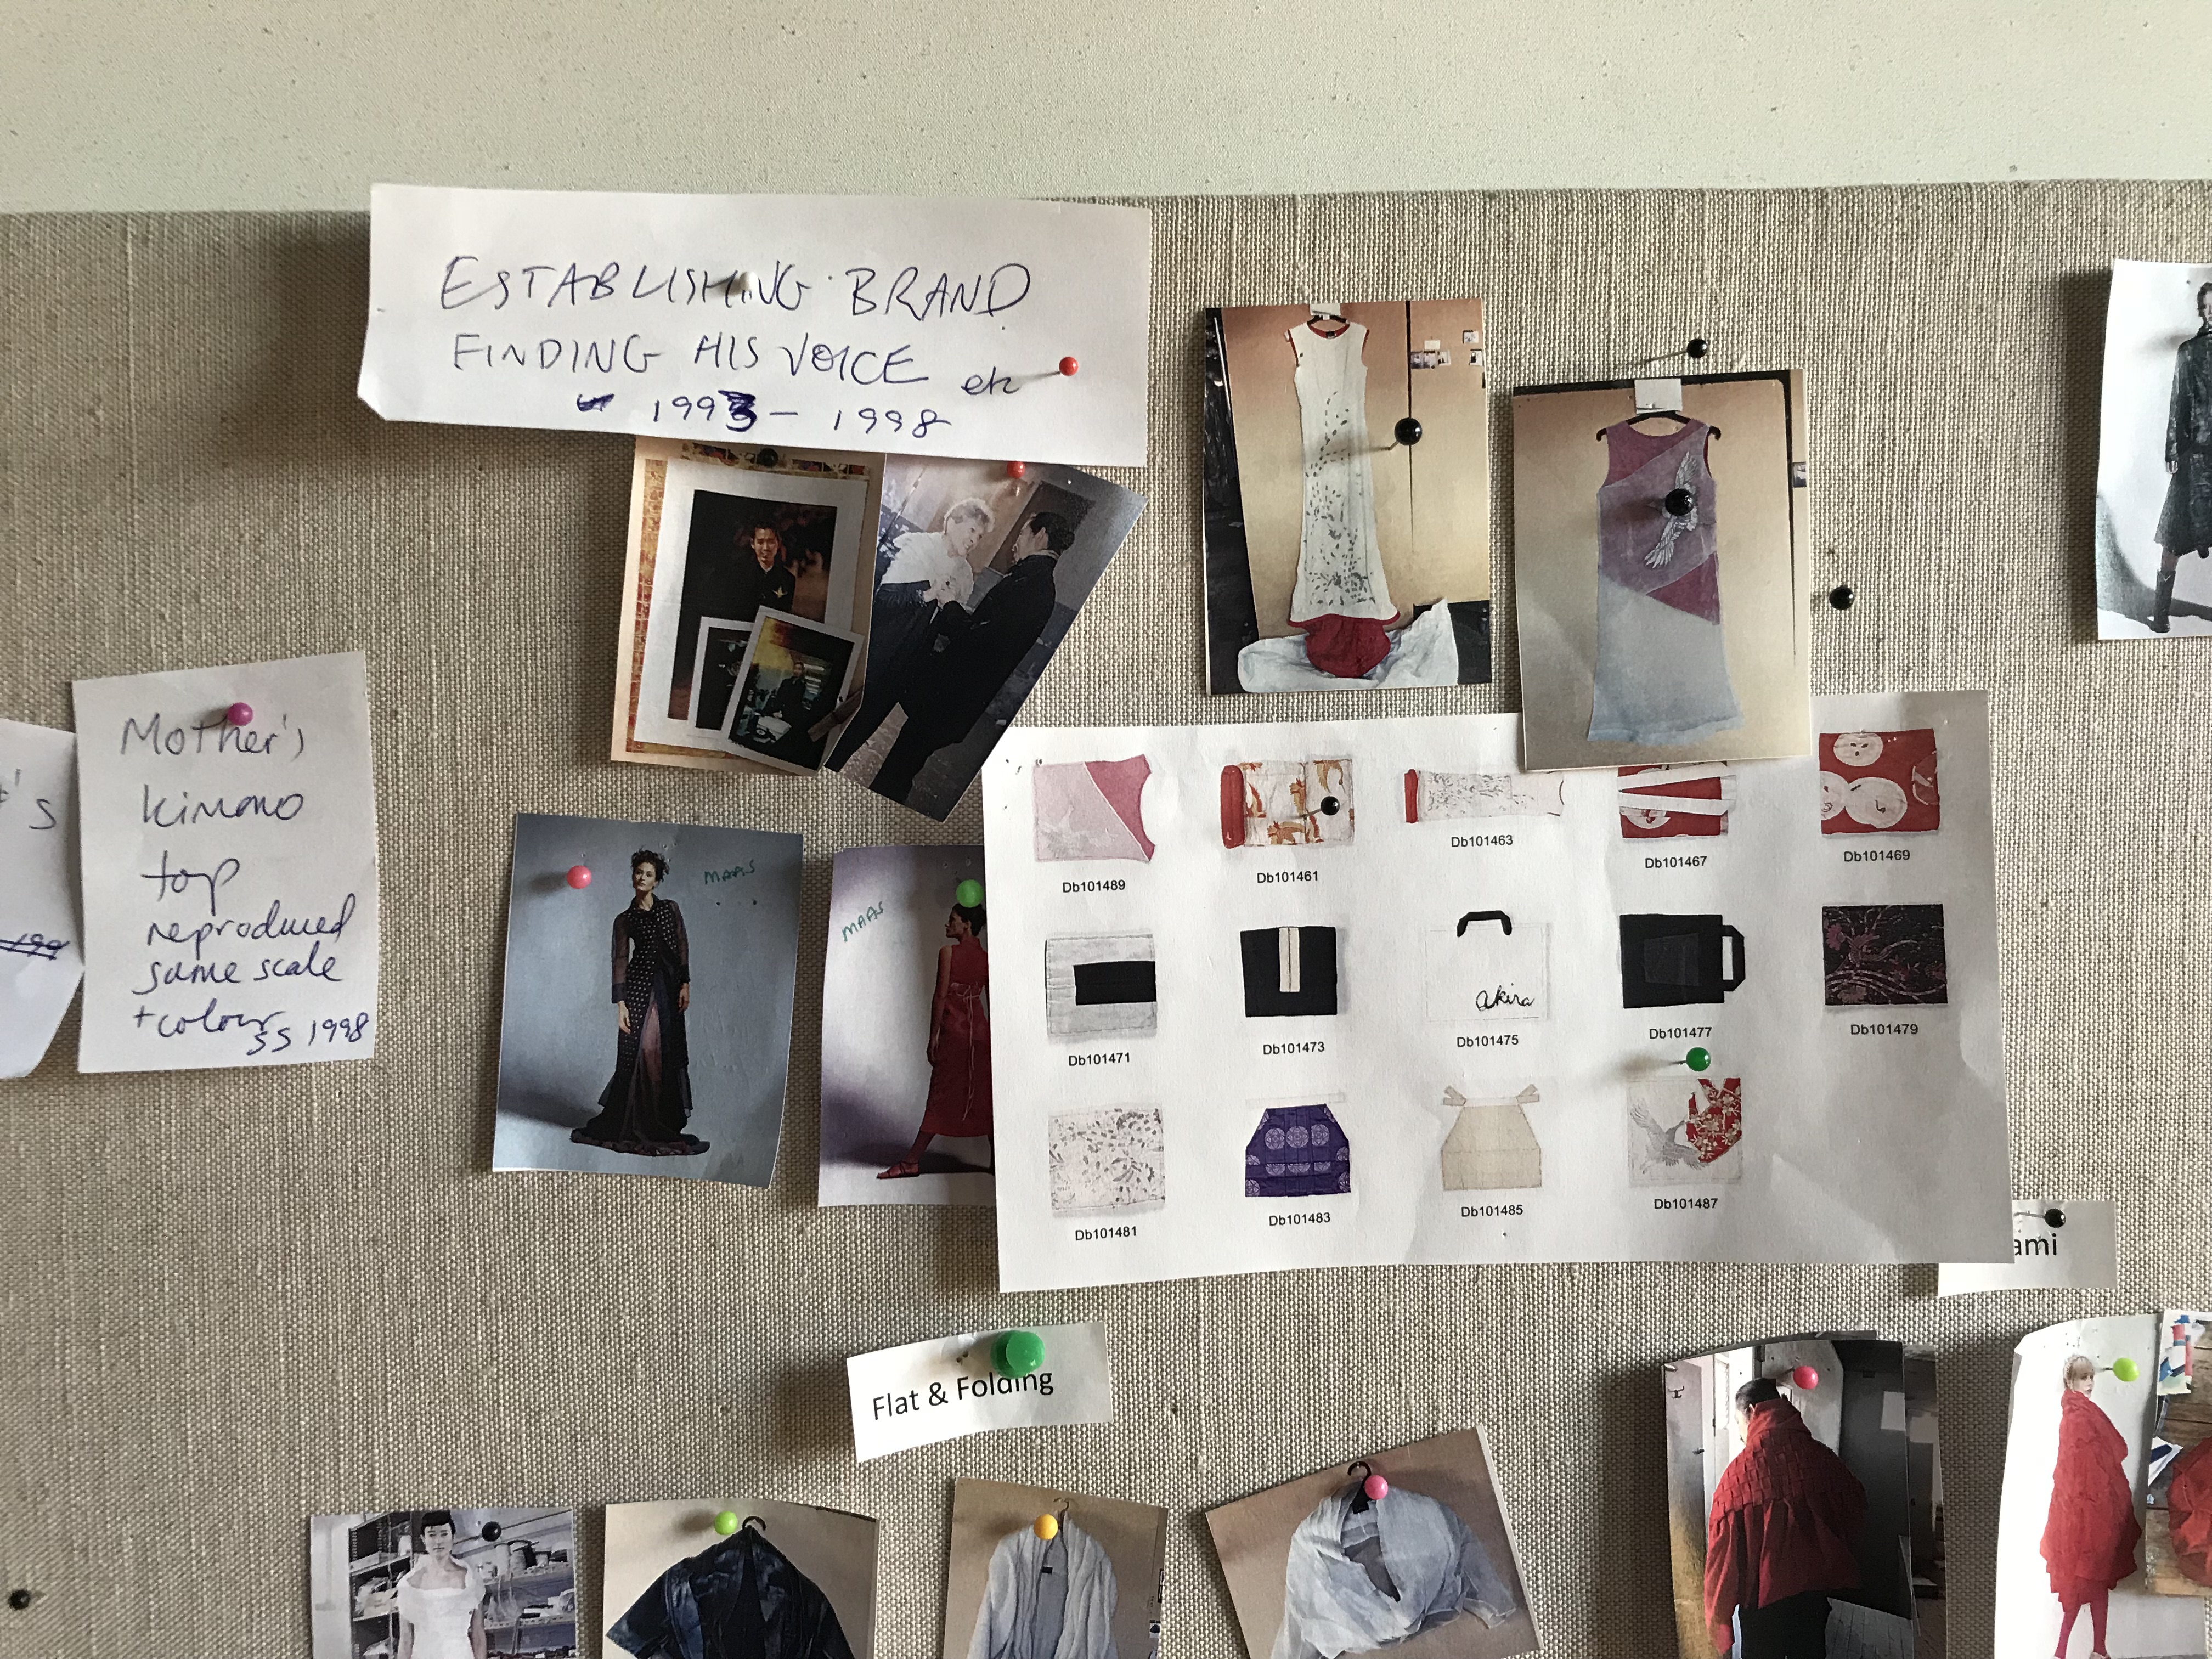 Closeup of a pin-board with handwritten notes and themes, in amongst photographs of garments.